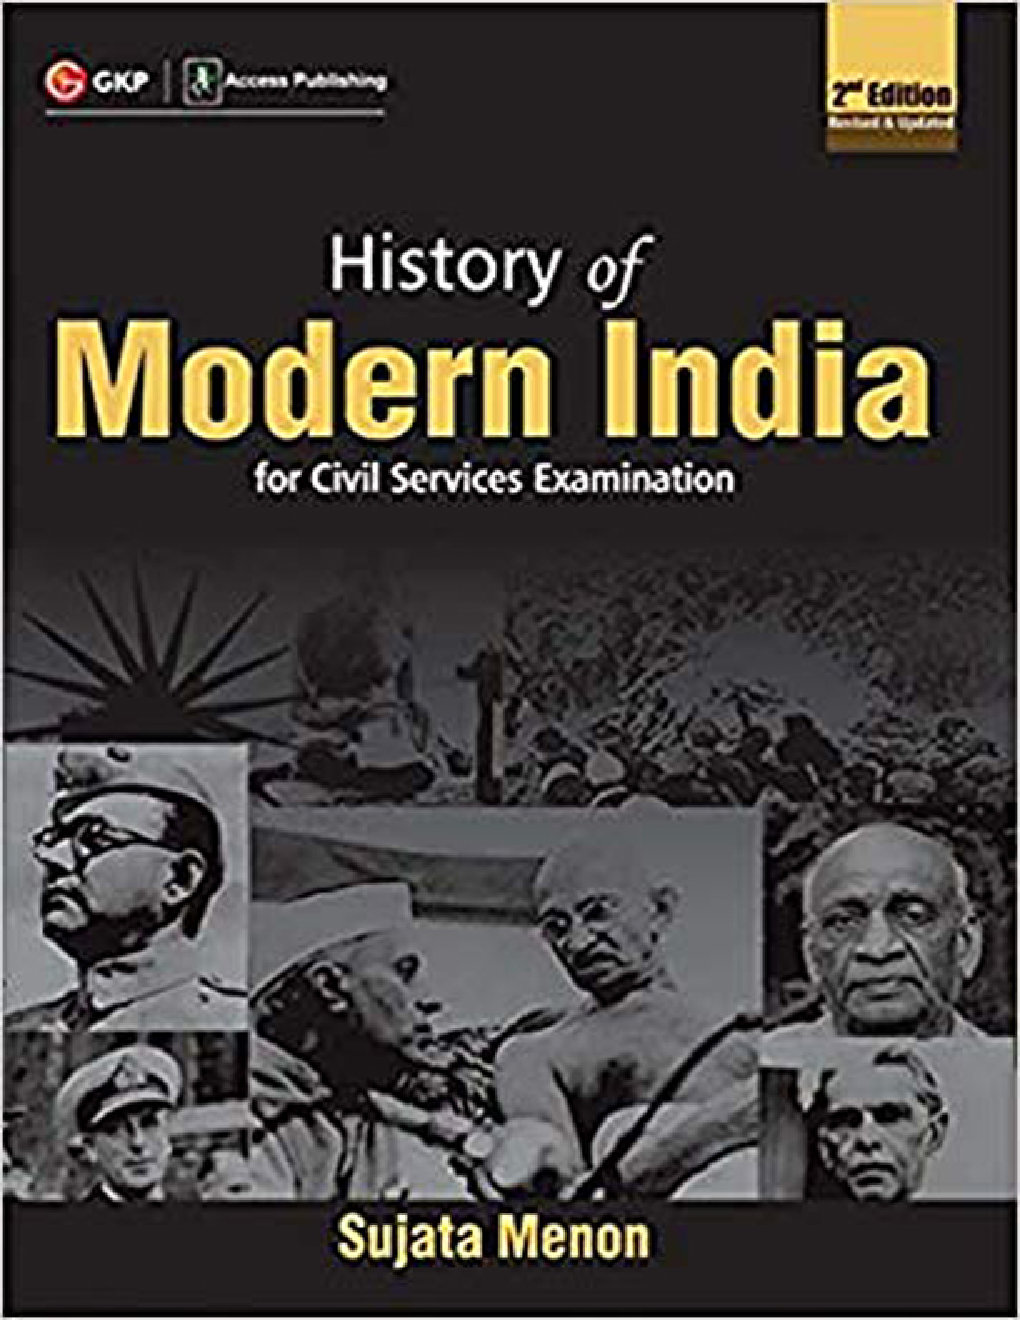 concise history of modern india by sujata menon pdf